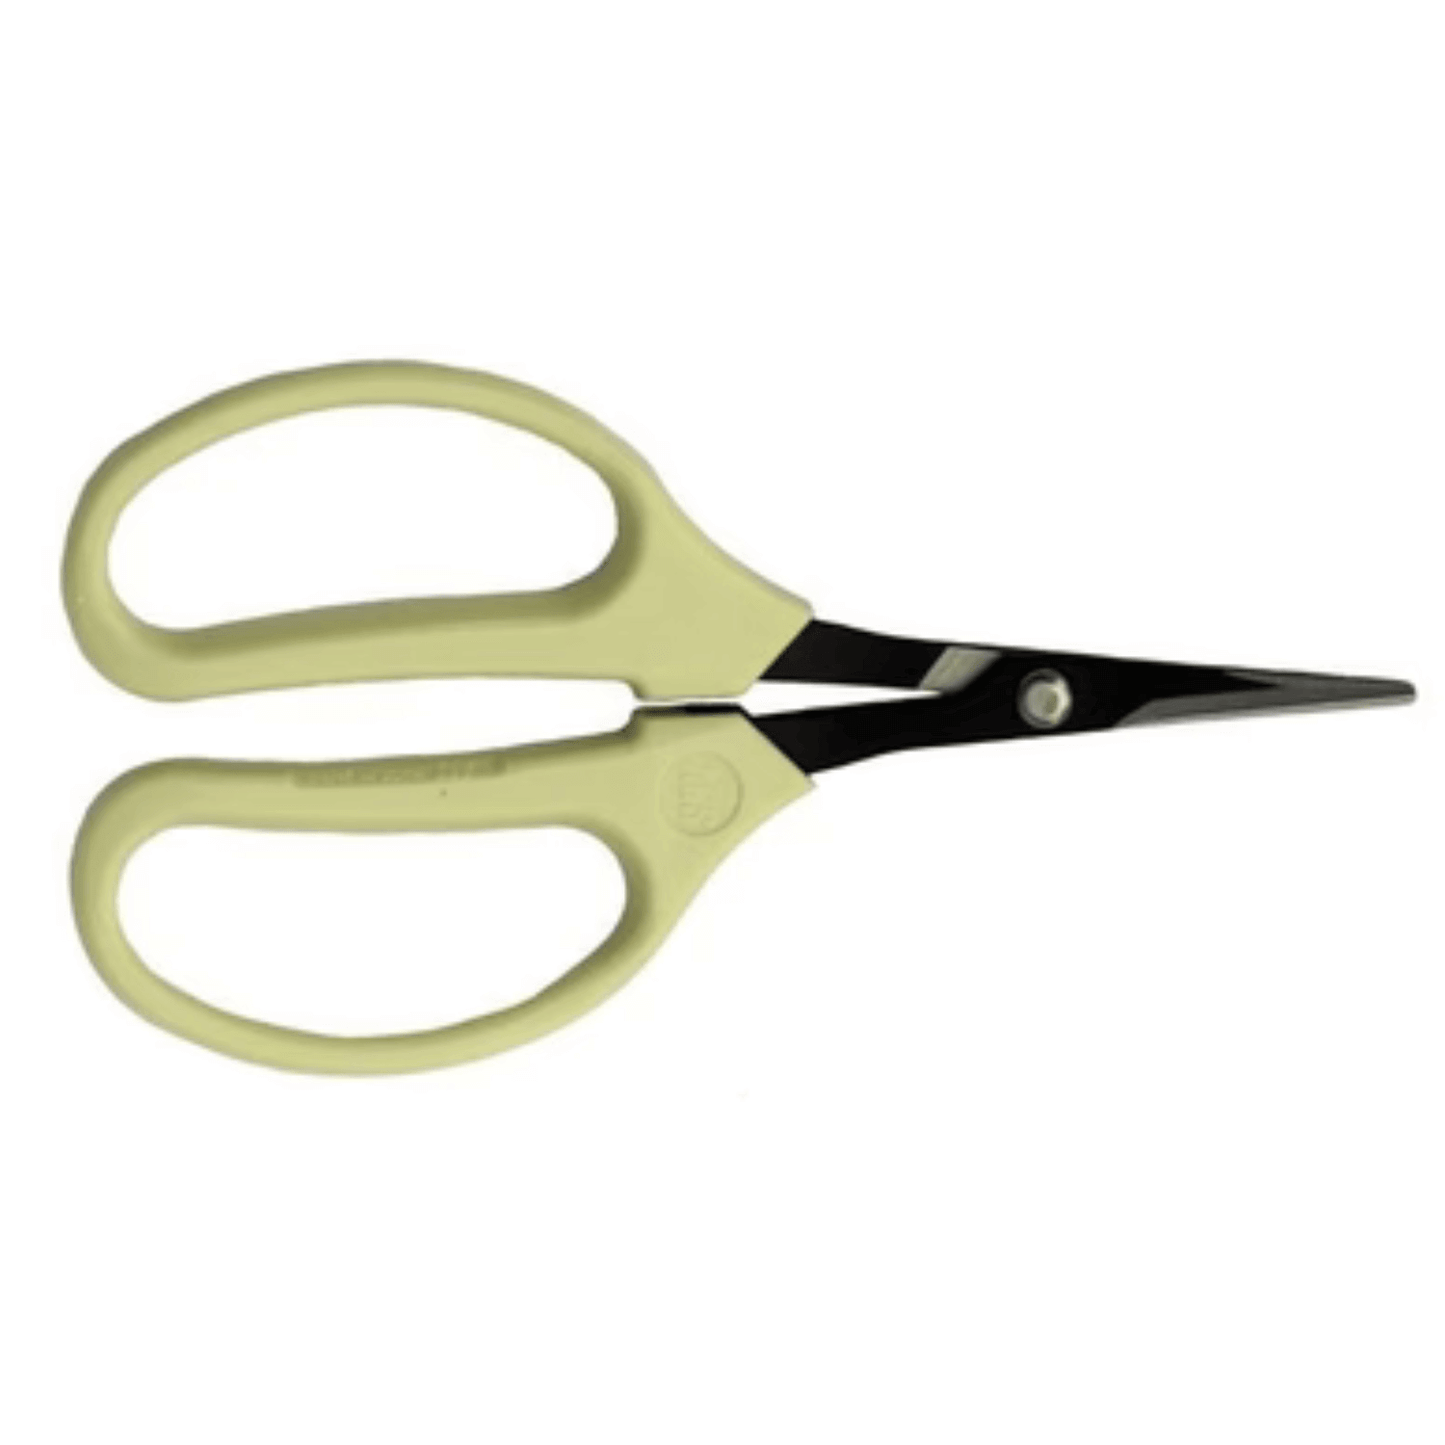 ARS Cultivation Scissors, Angled Carbon Steel Blade ARS320BM Harvest & Extraction